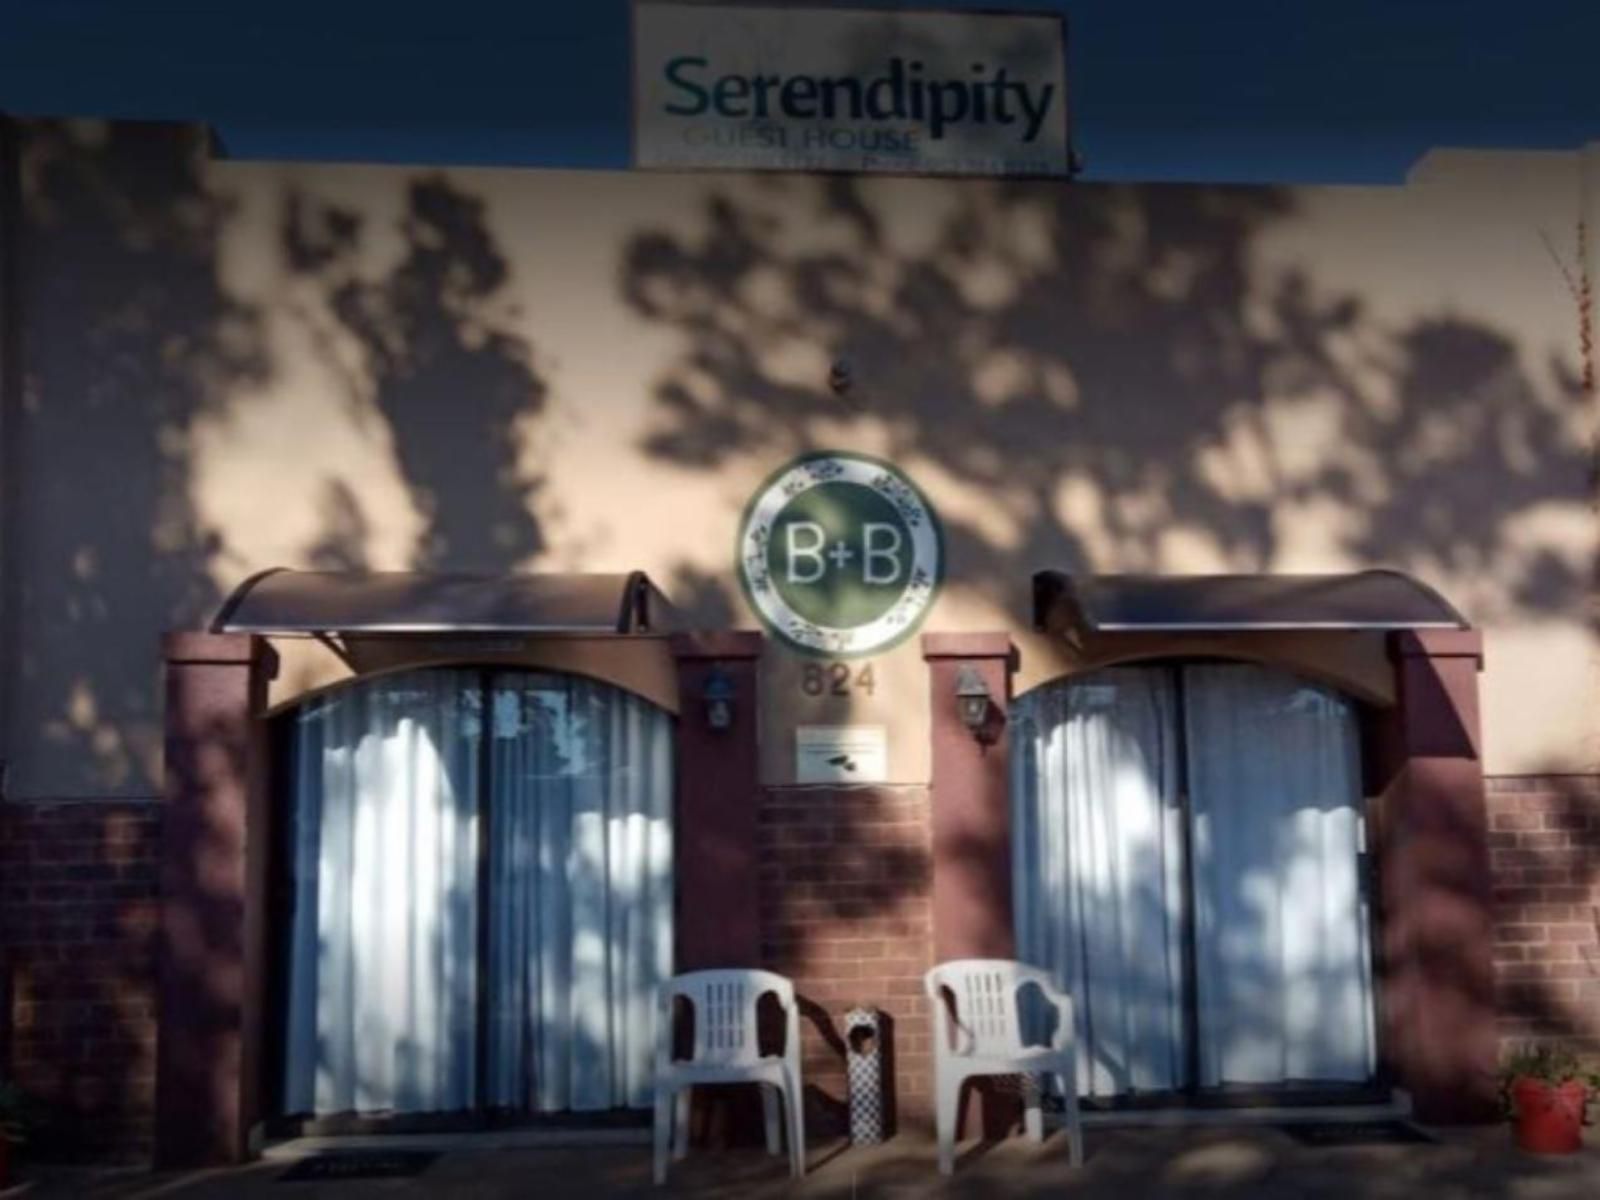 Serendipity Guest House Danielskuil Northern Cape South Africa Window, Architecture, Bar